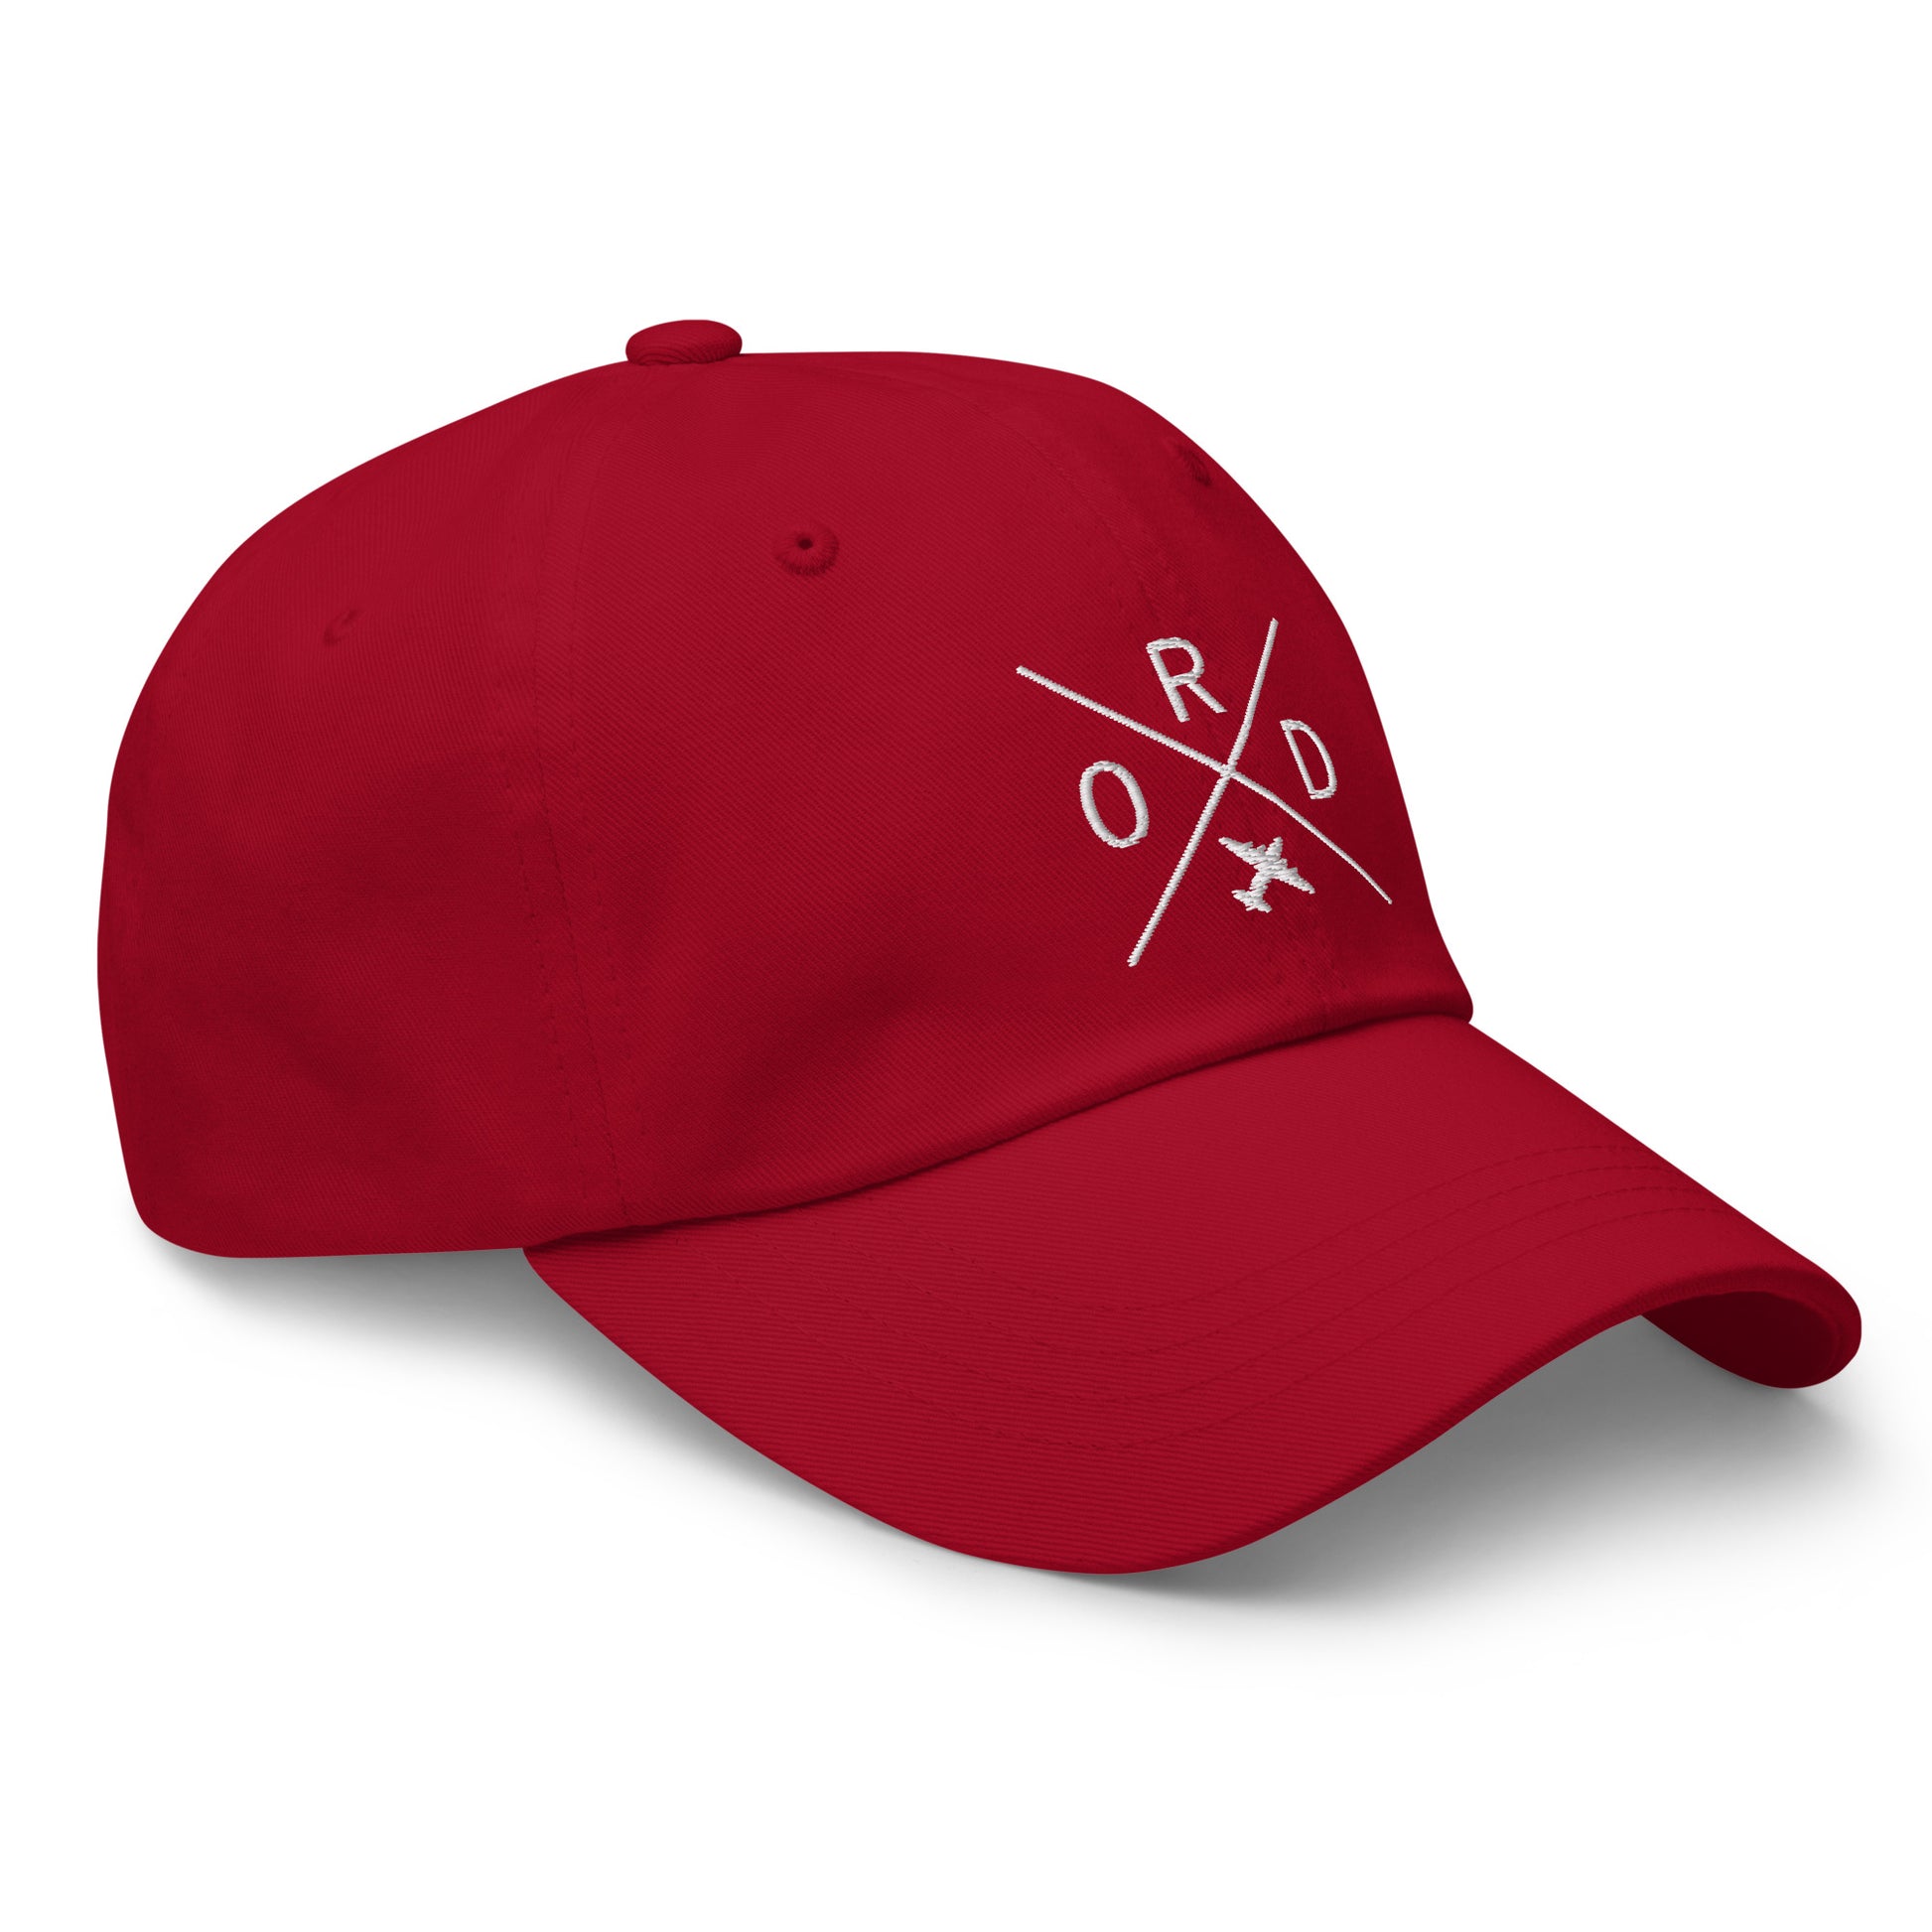 Crossed-X Dad Hat - White • ORD Chicago • YHM Designs - Image 20